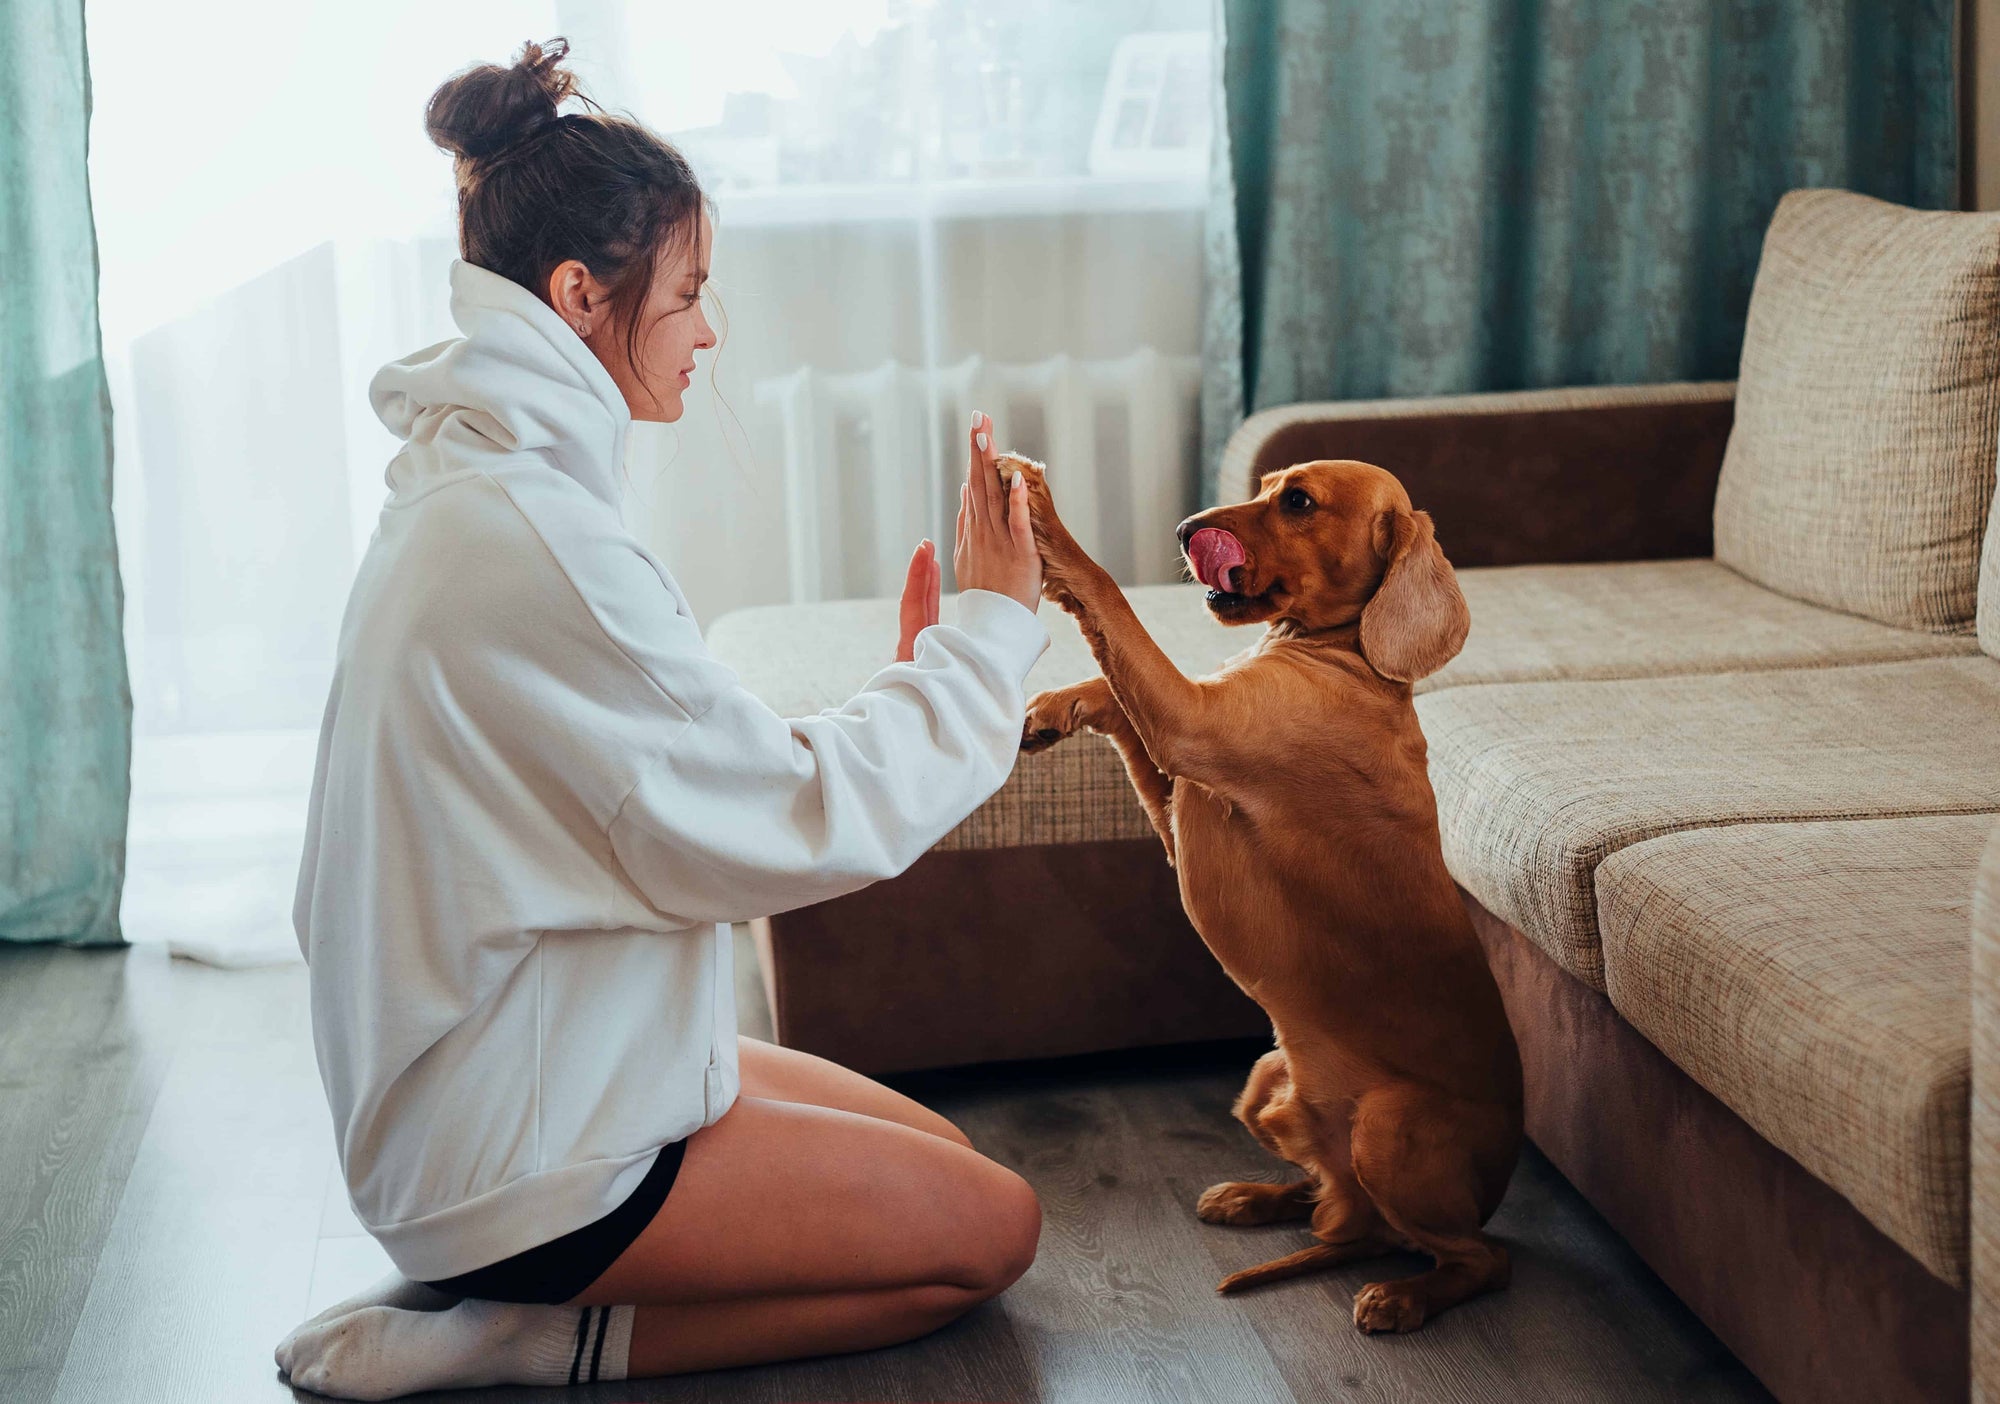 Tips on How to Raise a Dog in an Apartment